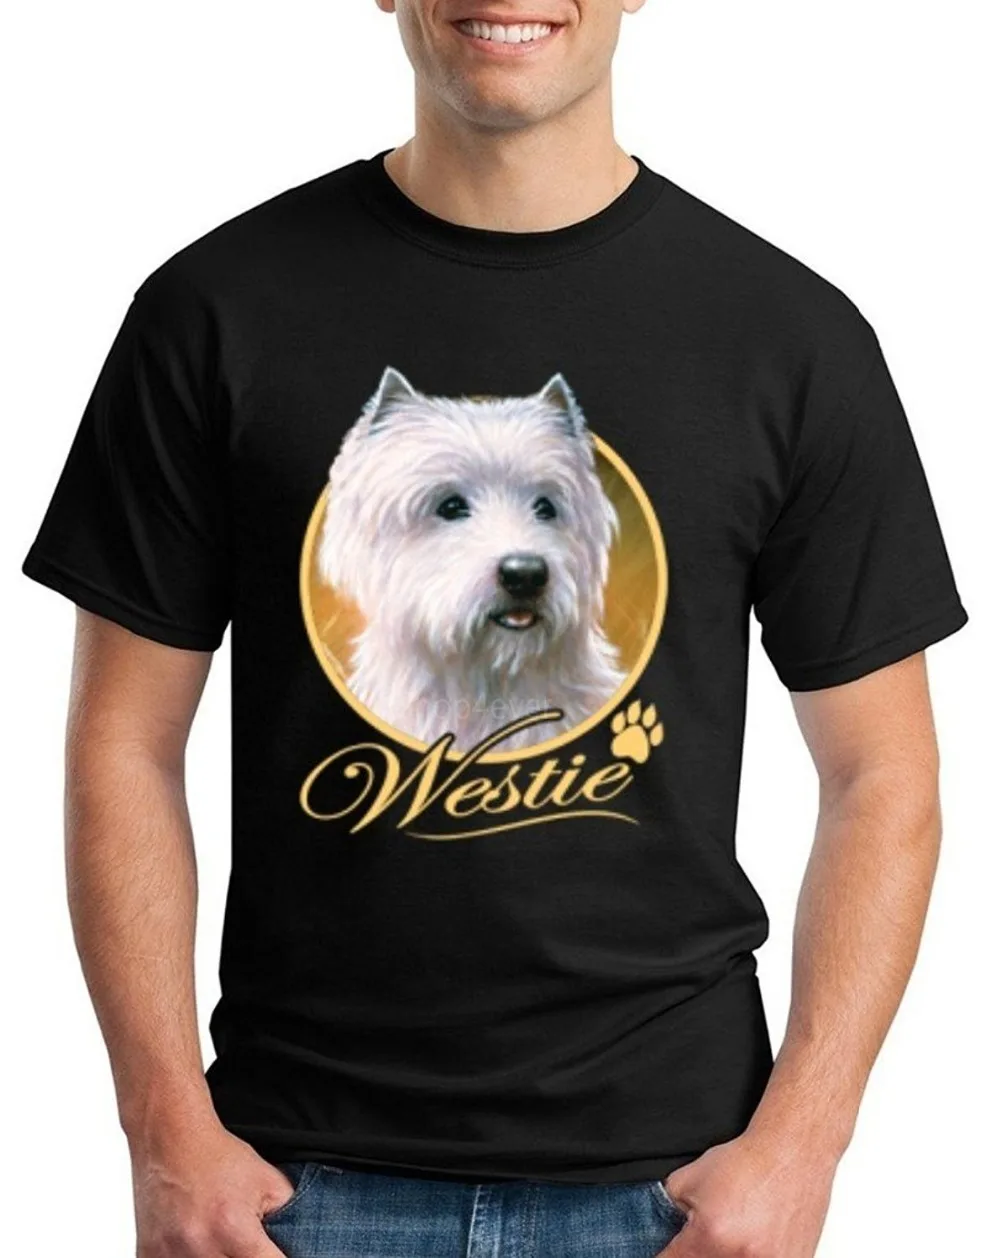 Cool Tee Shirts Short Sleeve Printed Crew Neck Westie Dog Tee For Men